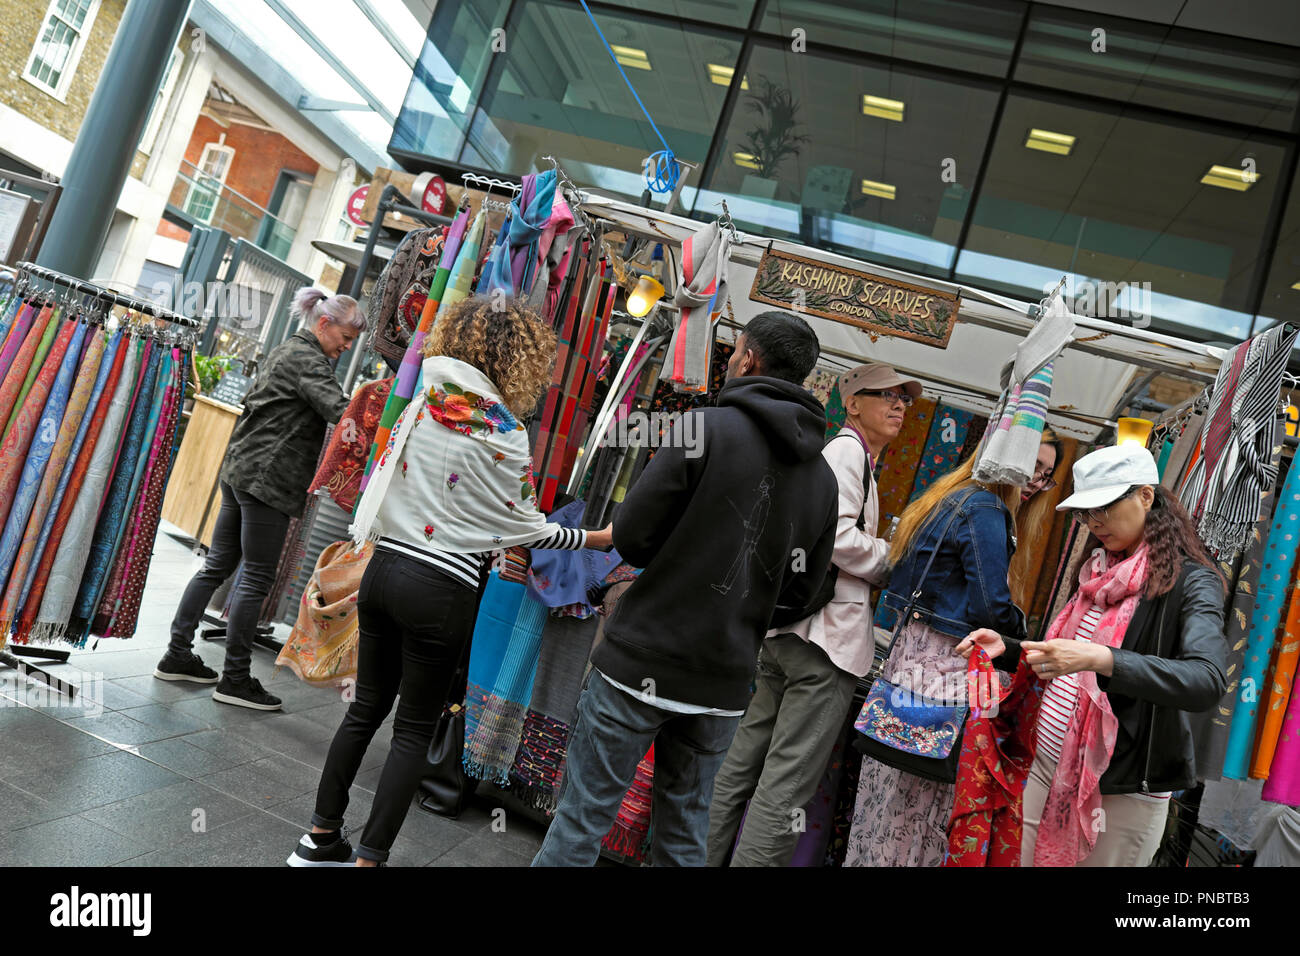 People shopping for scarves at a scarf stall 'Kashimi Scarves' in Spitalfields Market near Brick Lane in East London E1 UK  KATHY DEWITT Stock Photo